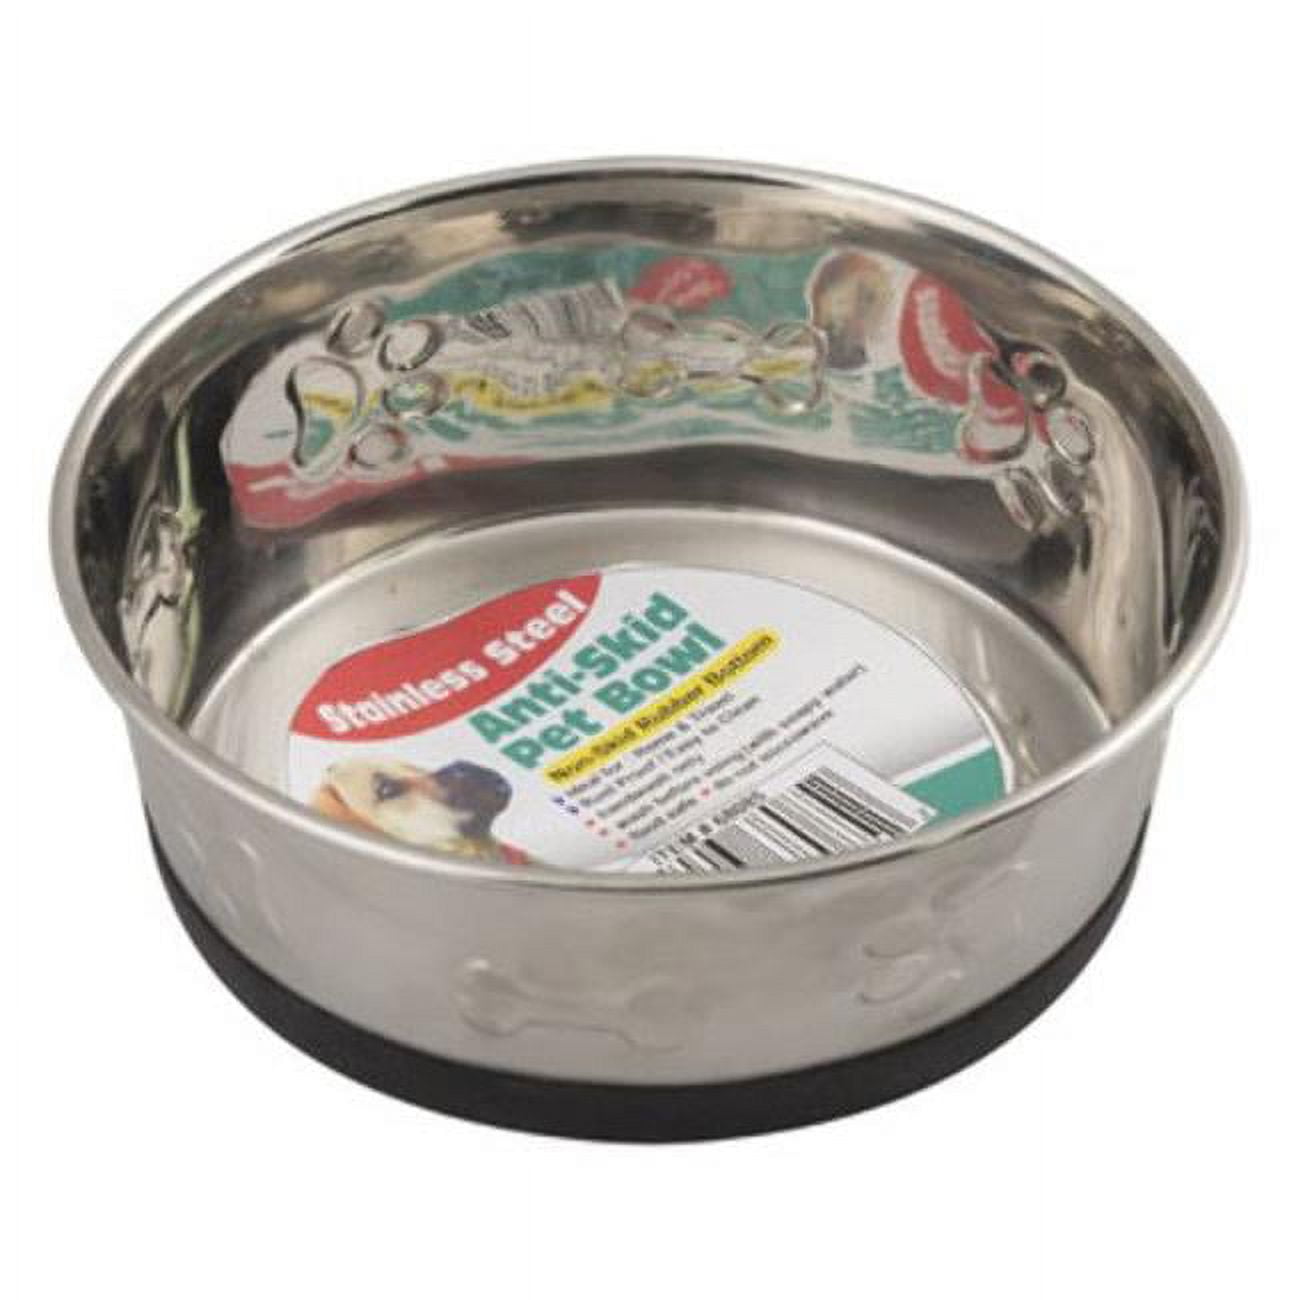 Picture of DDI 2324878 28 oz Stainless Steel Pet Bowl with Embossed Paw Prints, Silver - Case of 24 - 24 Per Pack